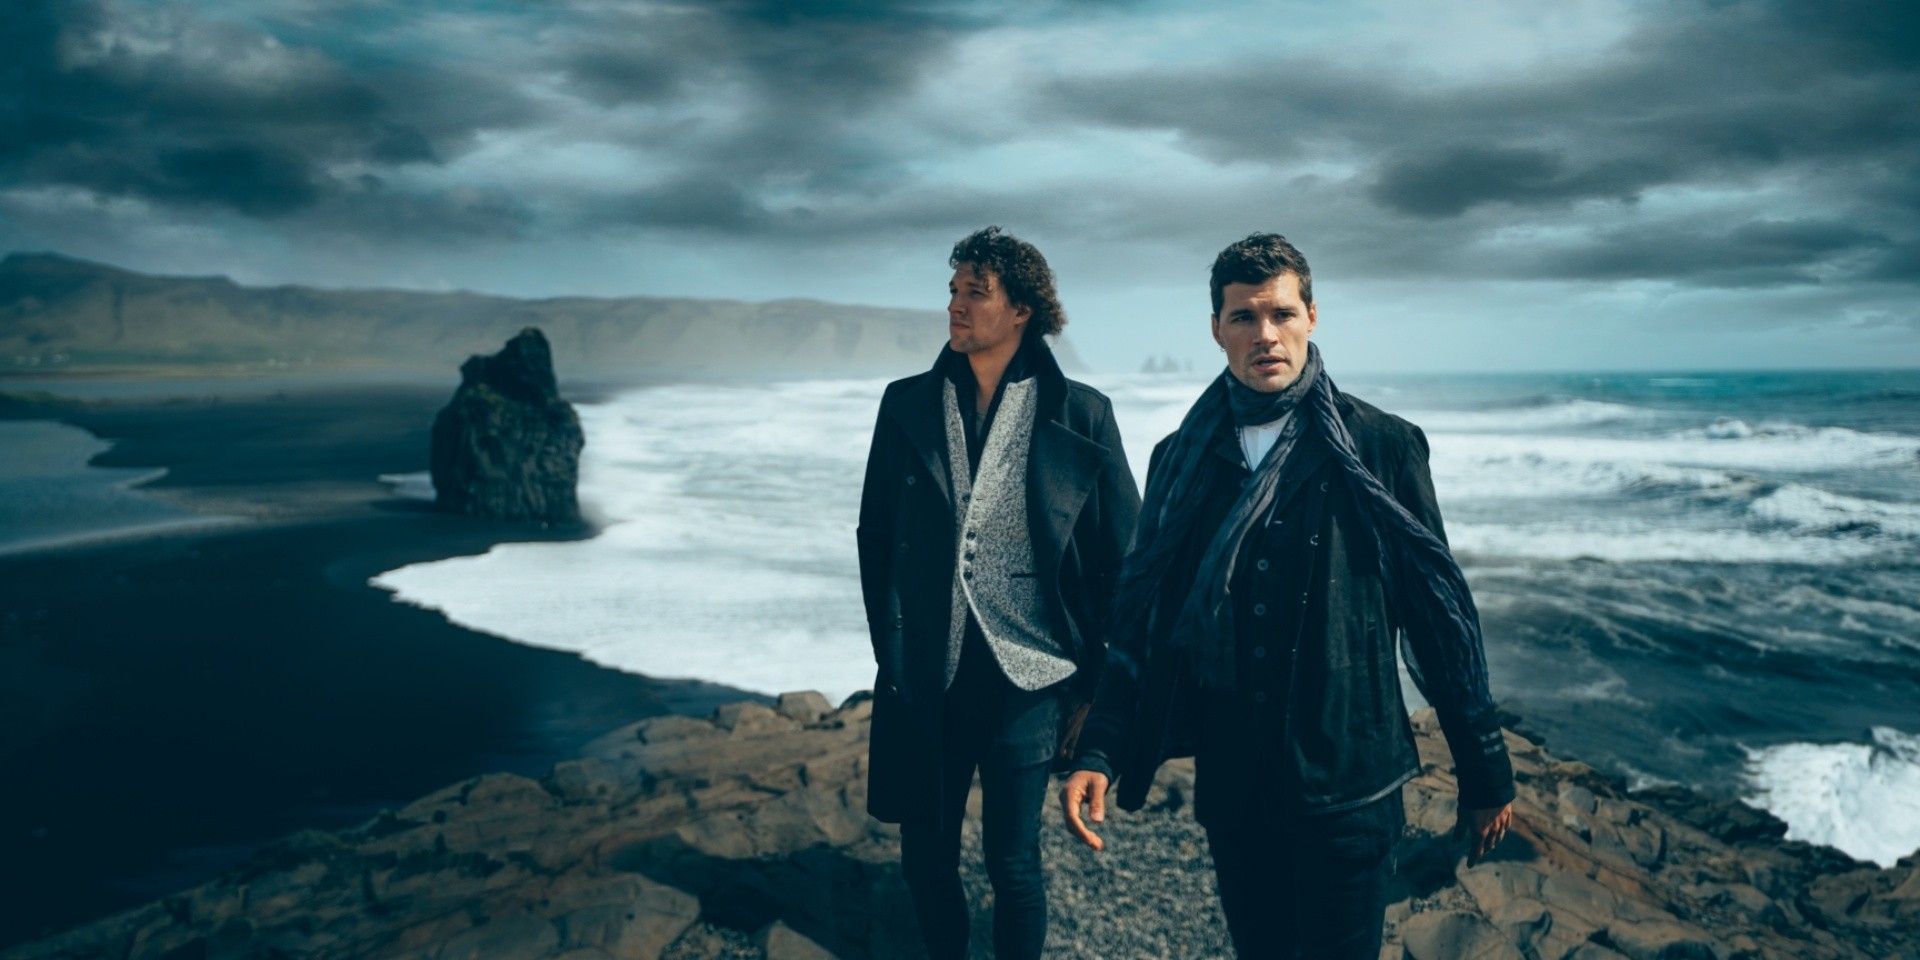 "Art that stands out is difficult to make": An interview with for KING & COUNTRY